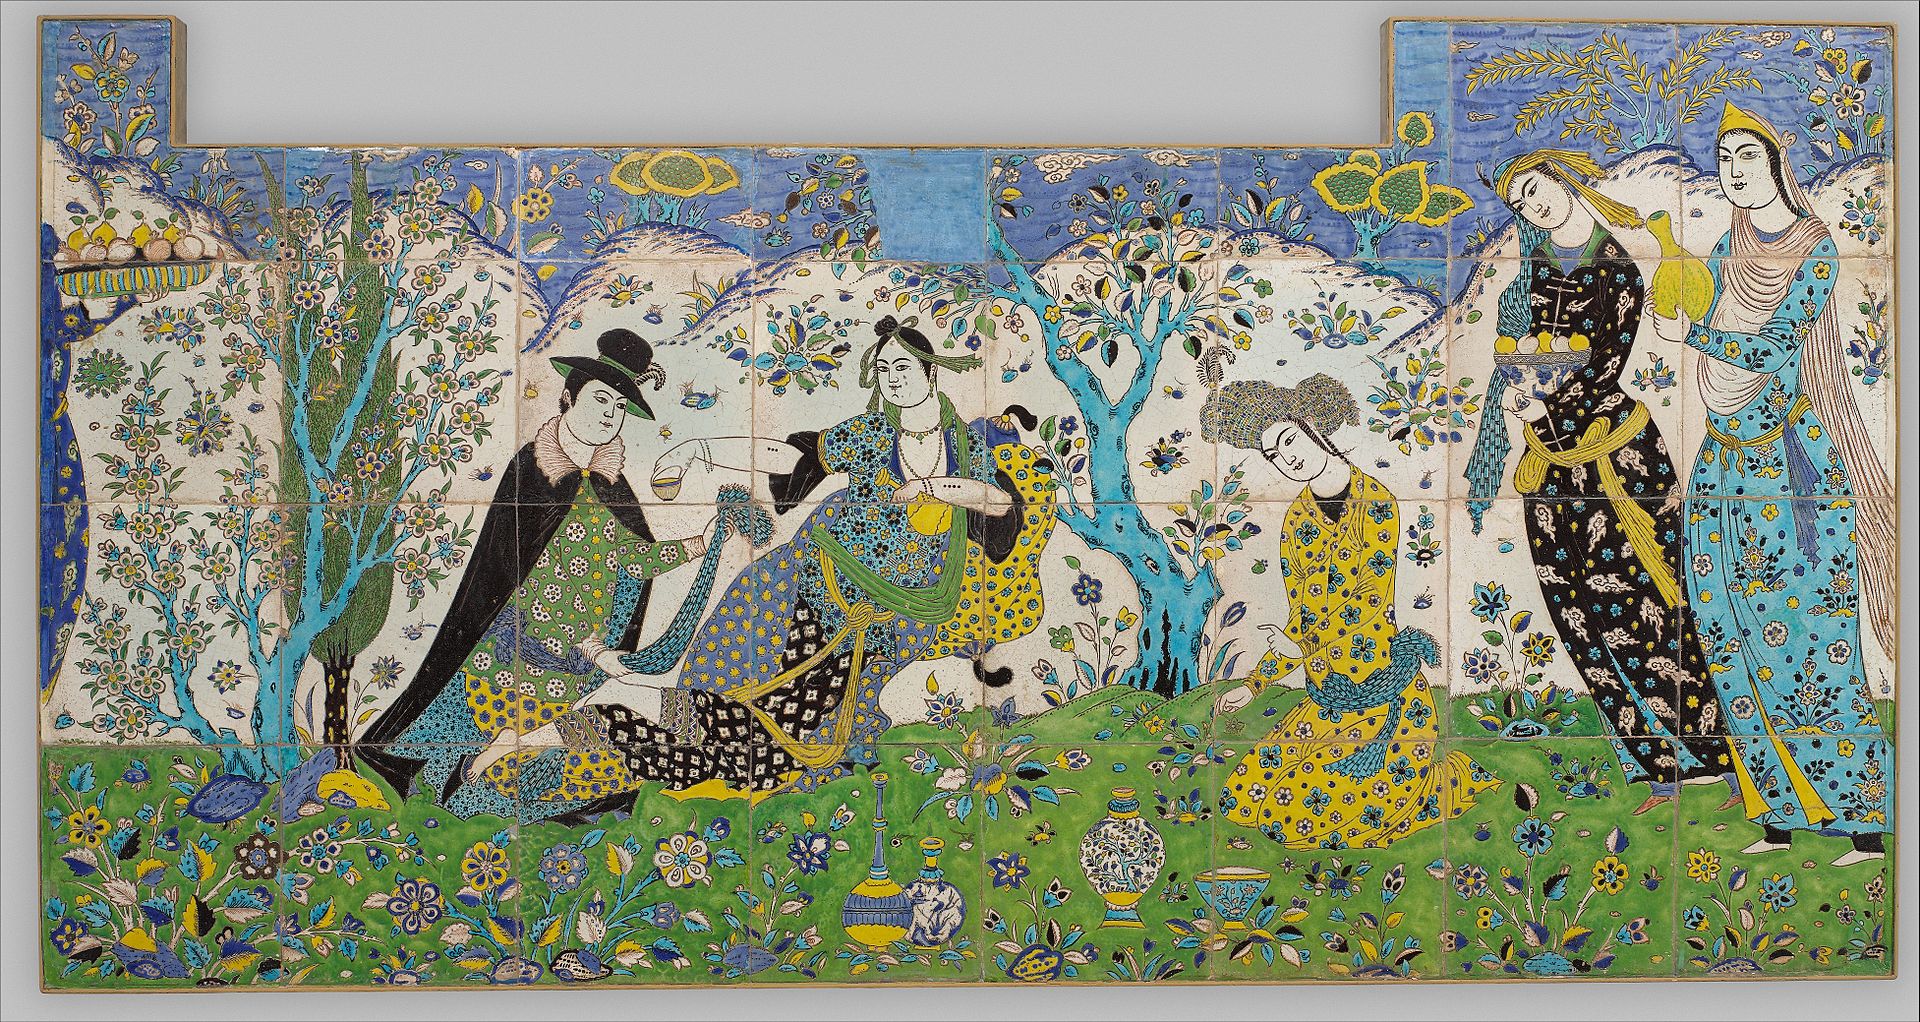 Ceramic tiles depicting a garden scene in a forest in which a woman leans on a pillow while a man kneels before her. Other figures offer refreshments.